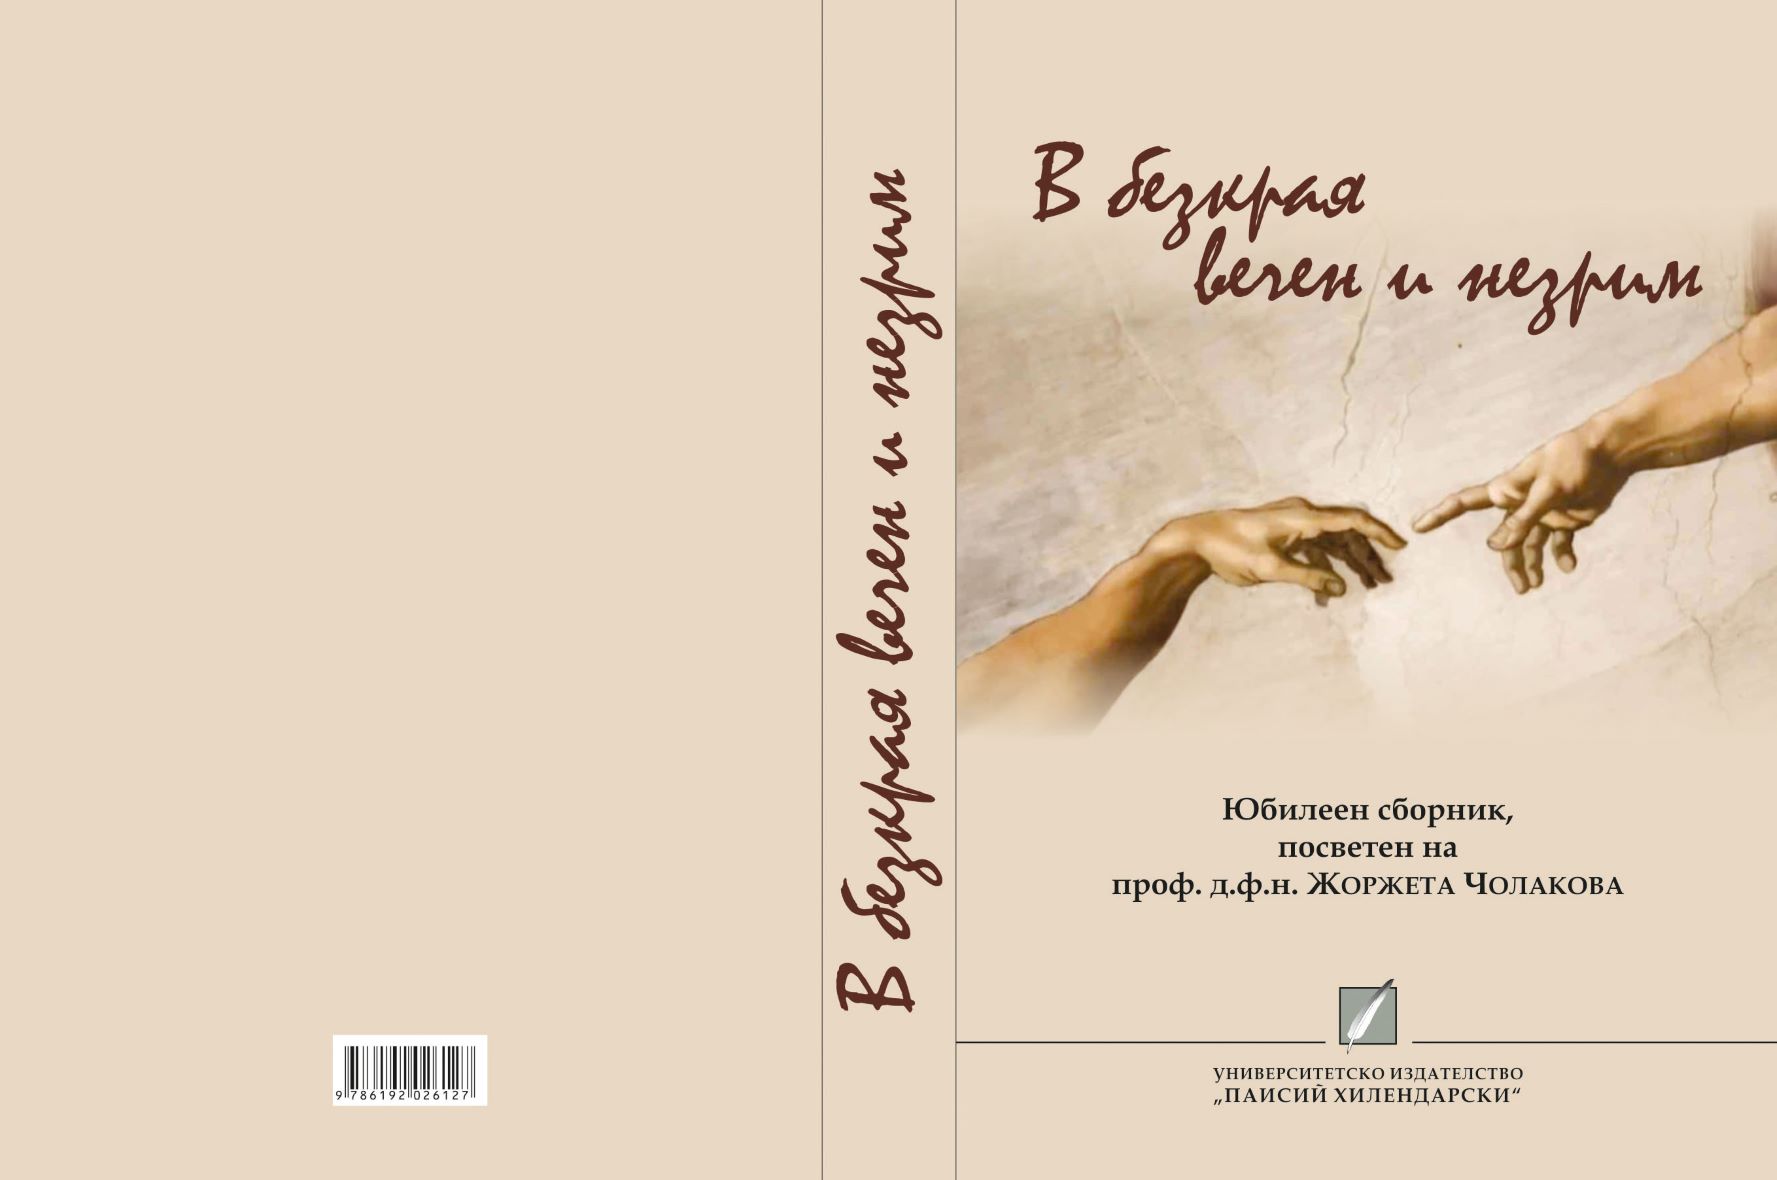 Botev's Ballad-Rhapsody About Immortality "Hadhi Dimitar" in Czech Translations Cover Image